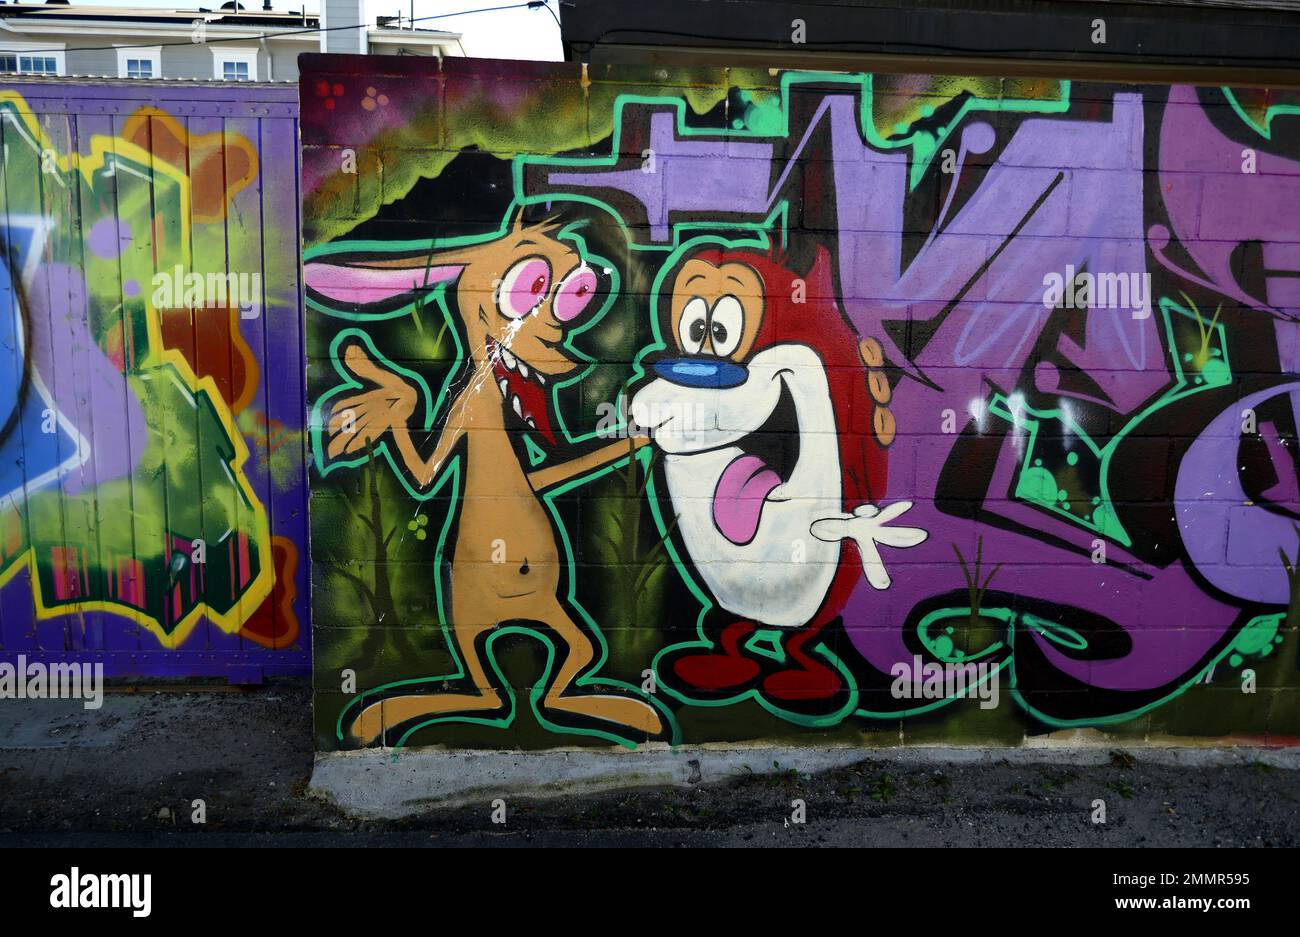 Los Angeles, California, USA 27th January 2023 Ren and Stimpy Street Art Mural on January 27, 2023 in Los Angeles, California, USA. Photo by Barry king/Alamy Stock Photo Stock Photo